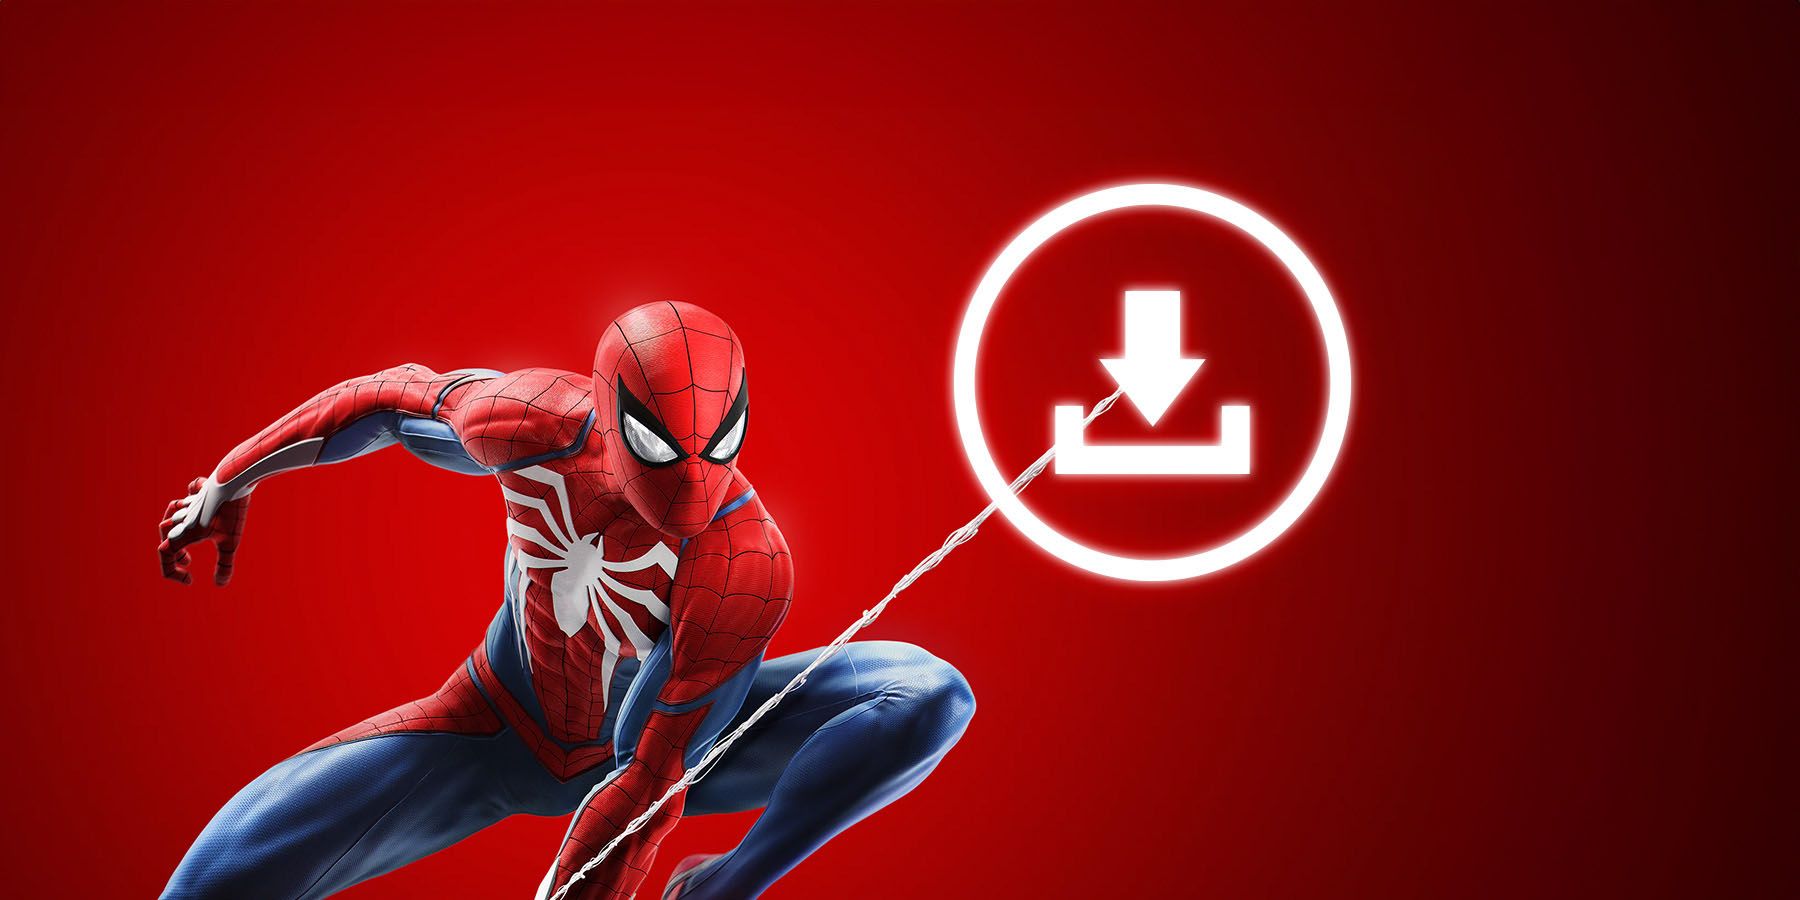 An image of Spider-Man 2's Peter Parker swinging past a download symbol against a red background.